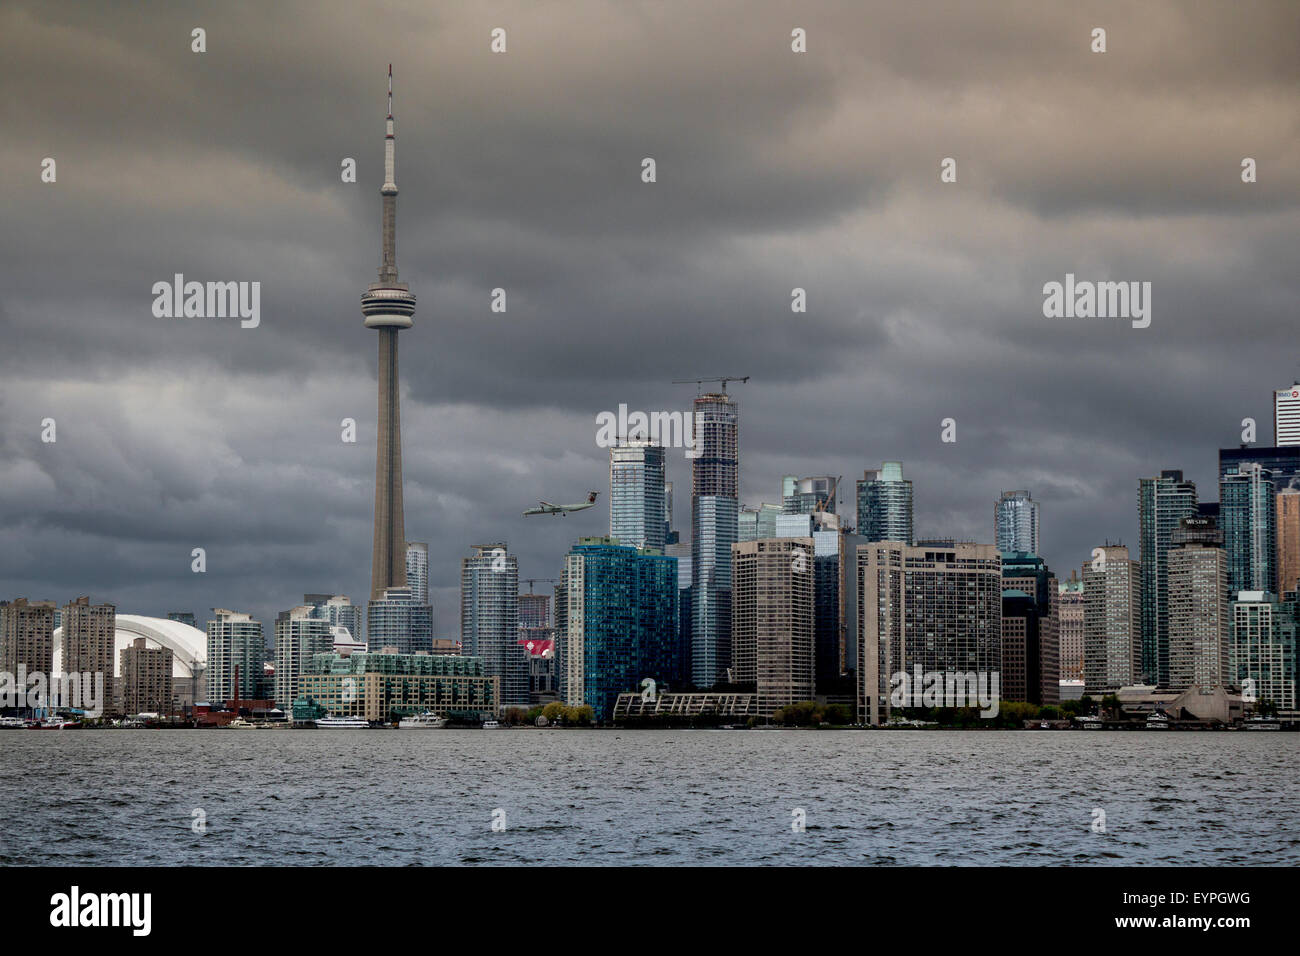 cityscape-of-the-city-of-toronto-over-a-